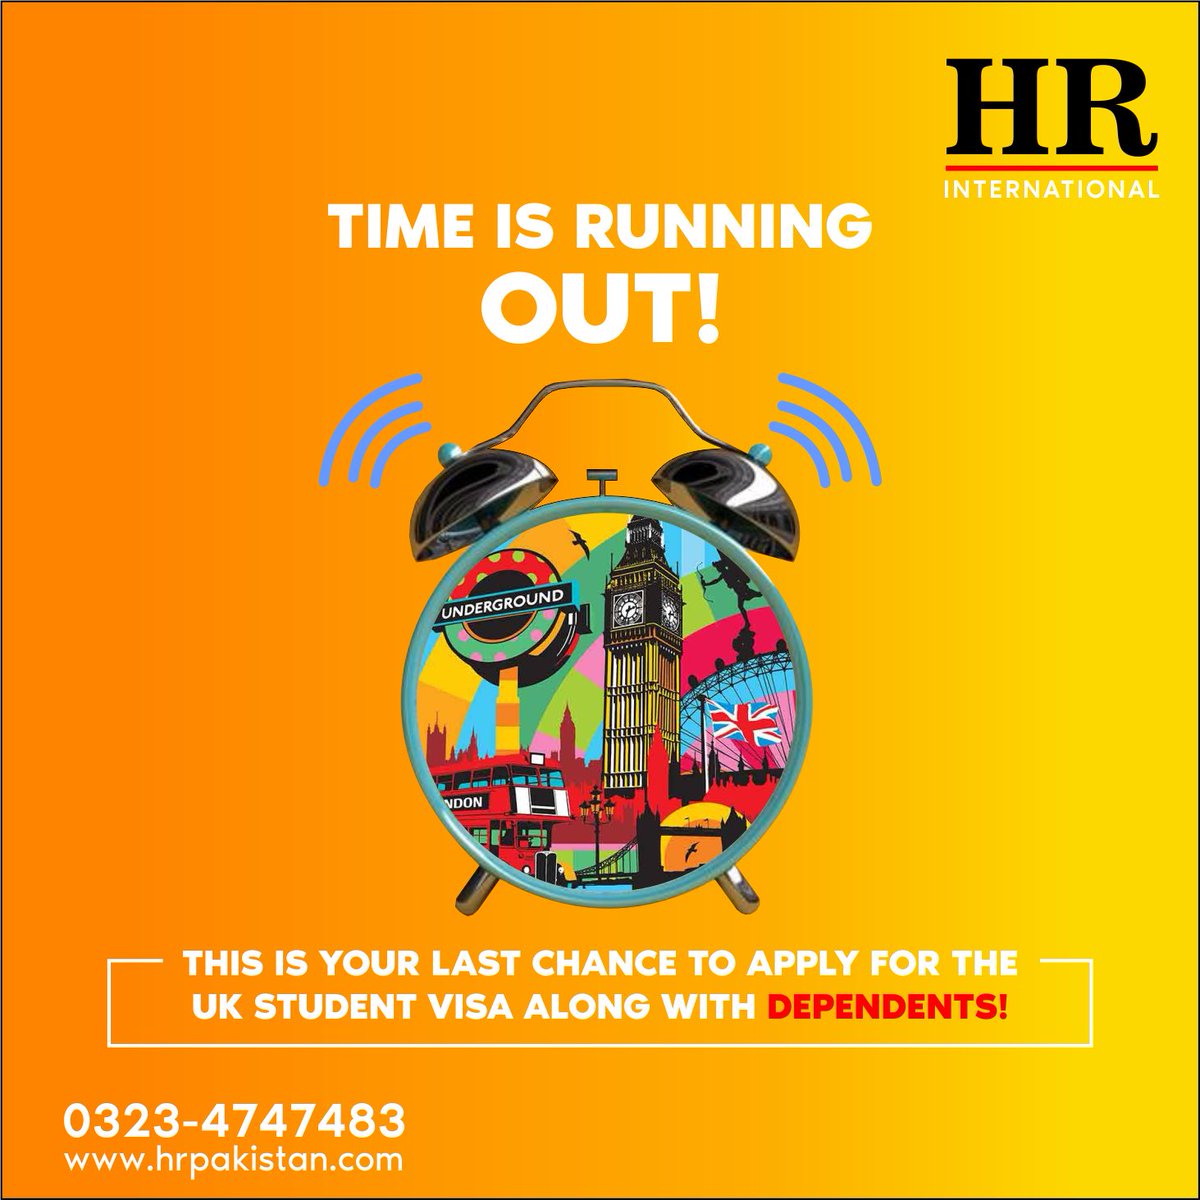 Time is Running Out! ⏰ 

This is your last chance to apply for UK student visa, along with dependents!

Get in touch with HR now!

📱Islamabad Office: +92 323 4747439
📱Lahore Office: +92 322 5757803
📱Karachi Office: +92 323 4747483
🧑‍💻 hrpakistan.com